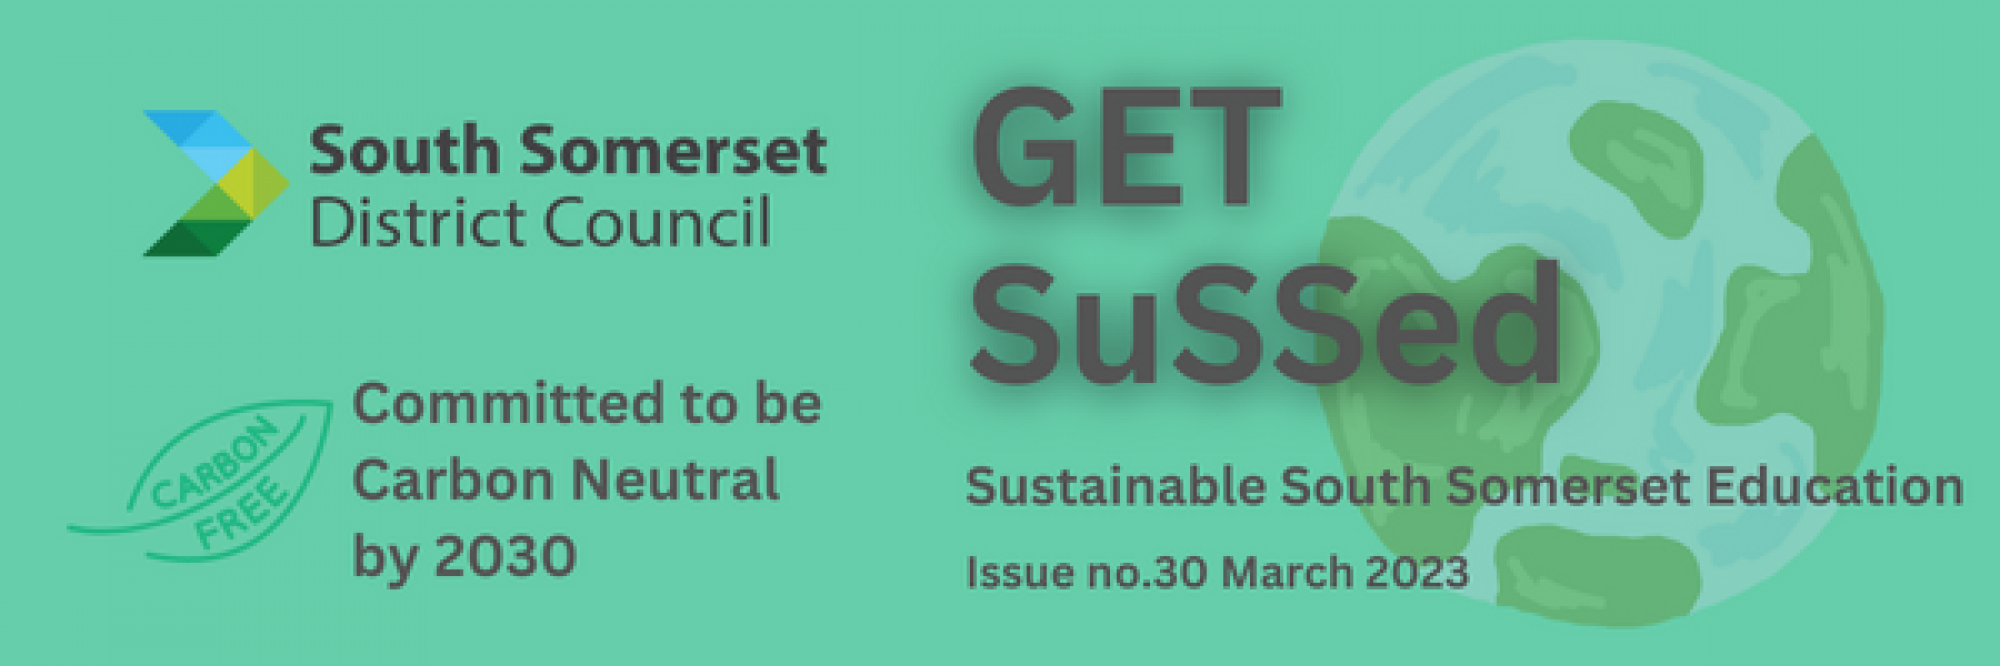 Get SuSSed from South Somerset District Council